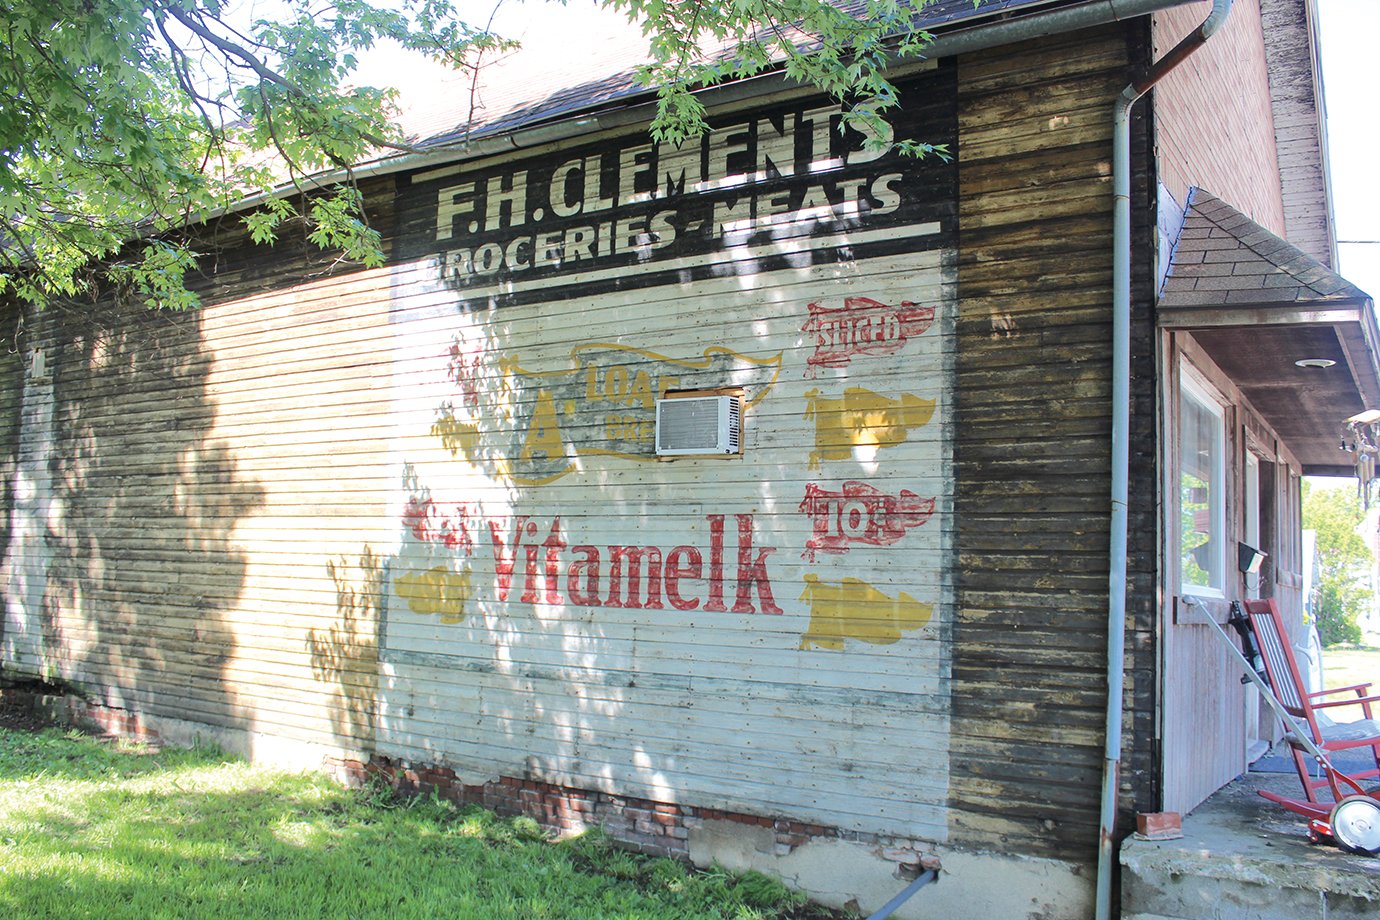 A Crawfordsville man looking to renovate the old F.H. Groceries general store discovered an original sign dating back to the building’s original construction, advertising “Vitamelk” and sliced bread. The new owner, Jeff Osborn, plans to open his own woodworking business in the dilapidated building this fall following a complete overhaul.